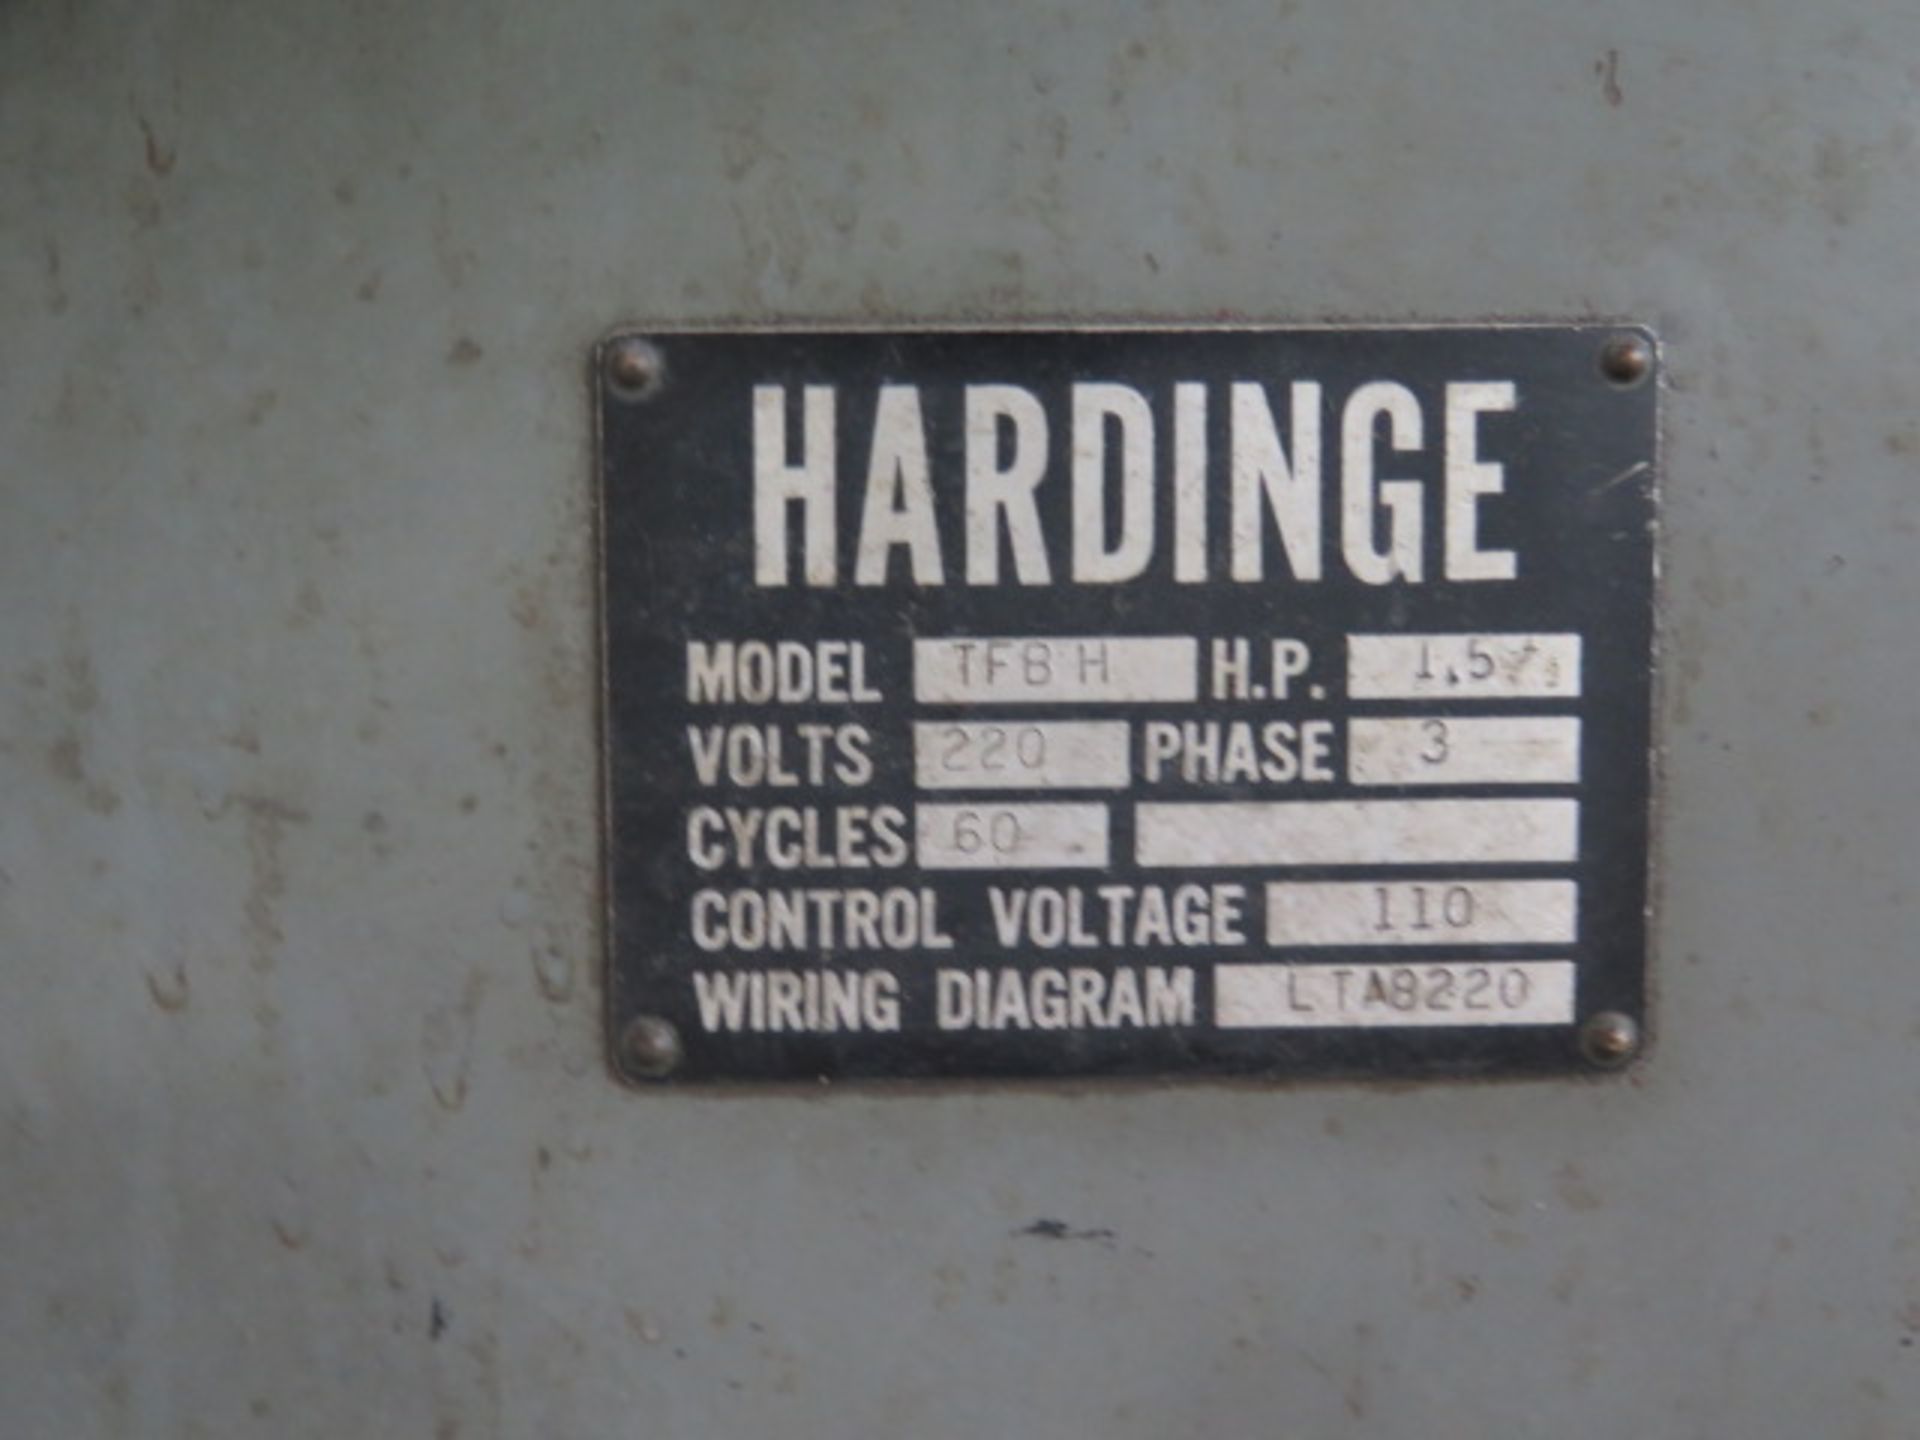 Hardinge TFB-H Wide Bed Second OP Lathe w/ 125-3000 RPM, Tailstock, Power Feeds, KDK, SOLD AS IS - Image 13 of 13